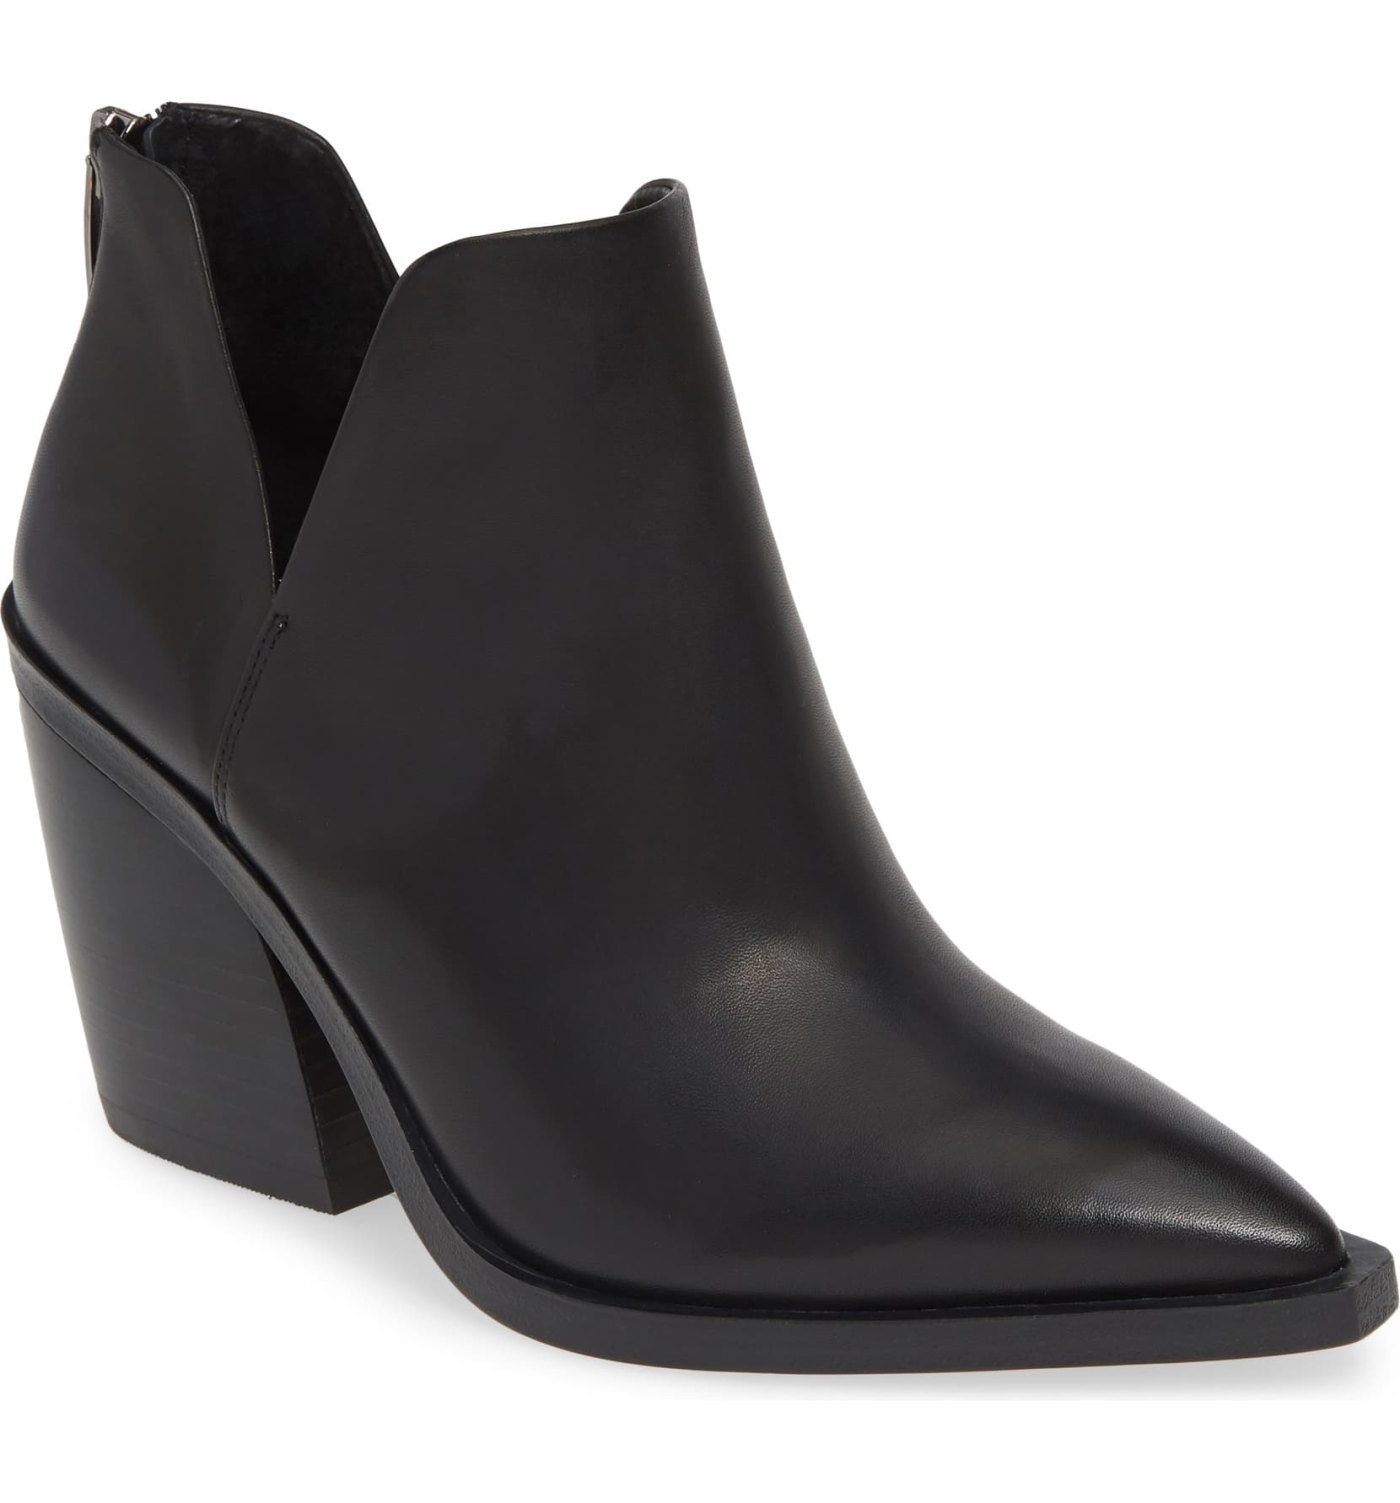 Vince Camuto Booties Perfectly Balance Classy and Edgy — 33% Off ...